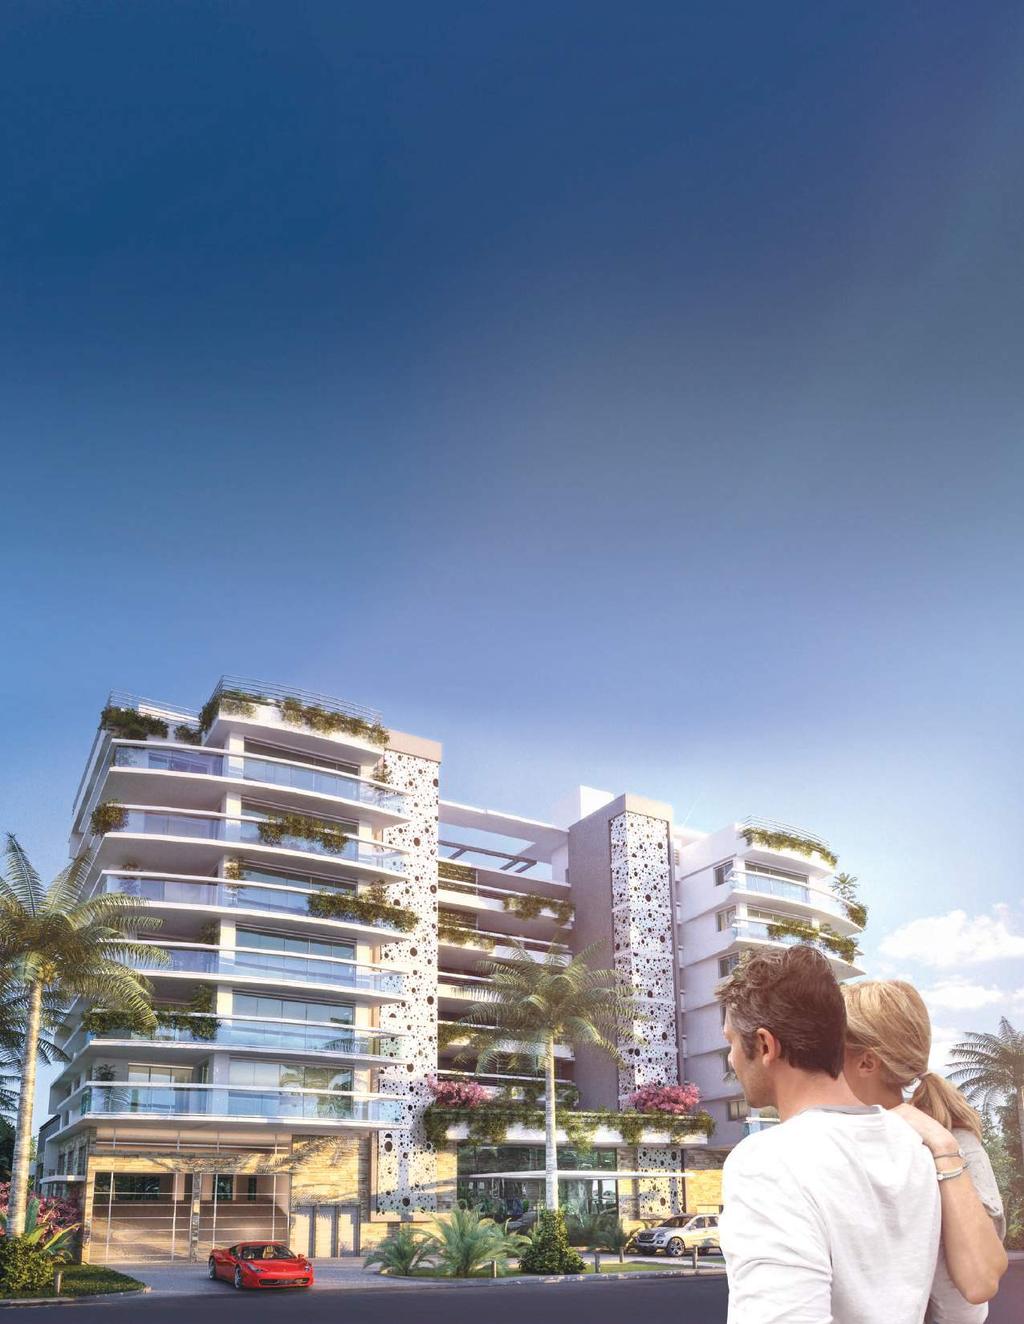 BAY A perfect mix between sophistication and comfort. Bay Harbor is raised on 8 floors and features 36 magnificent modern residences.